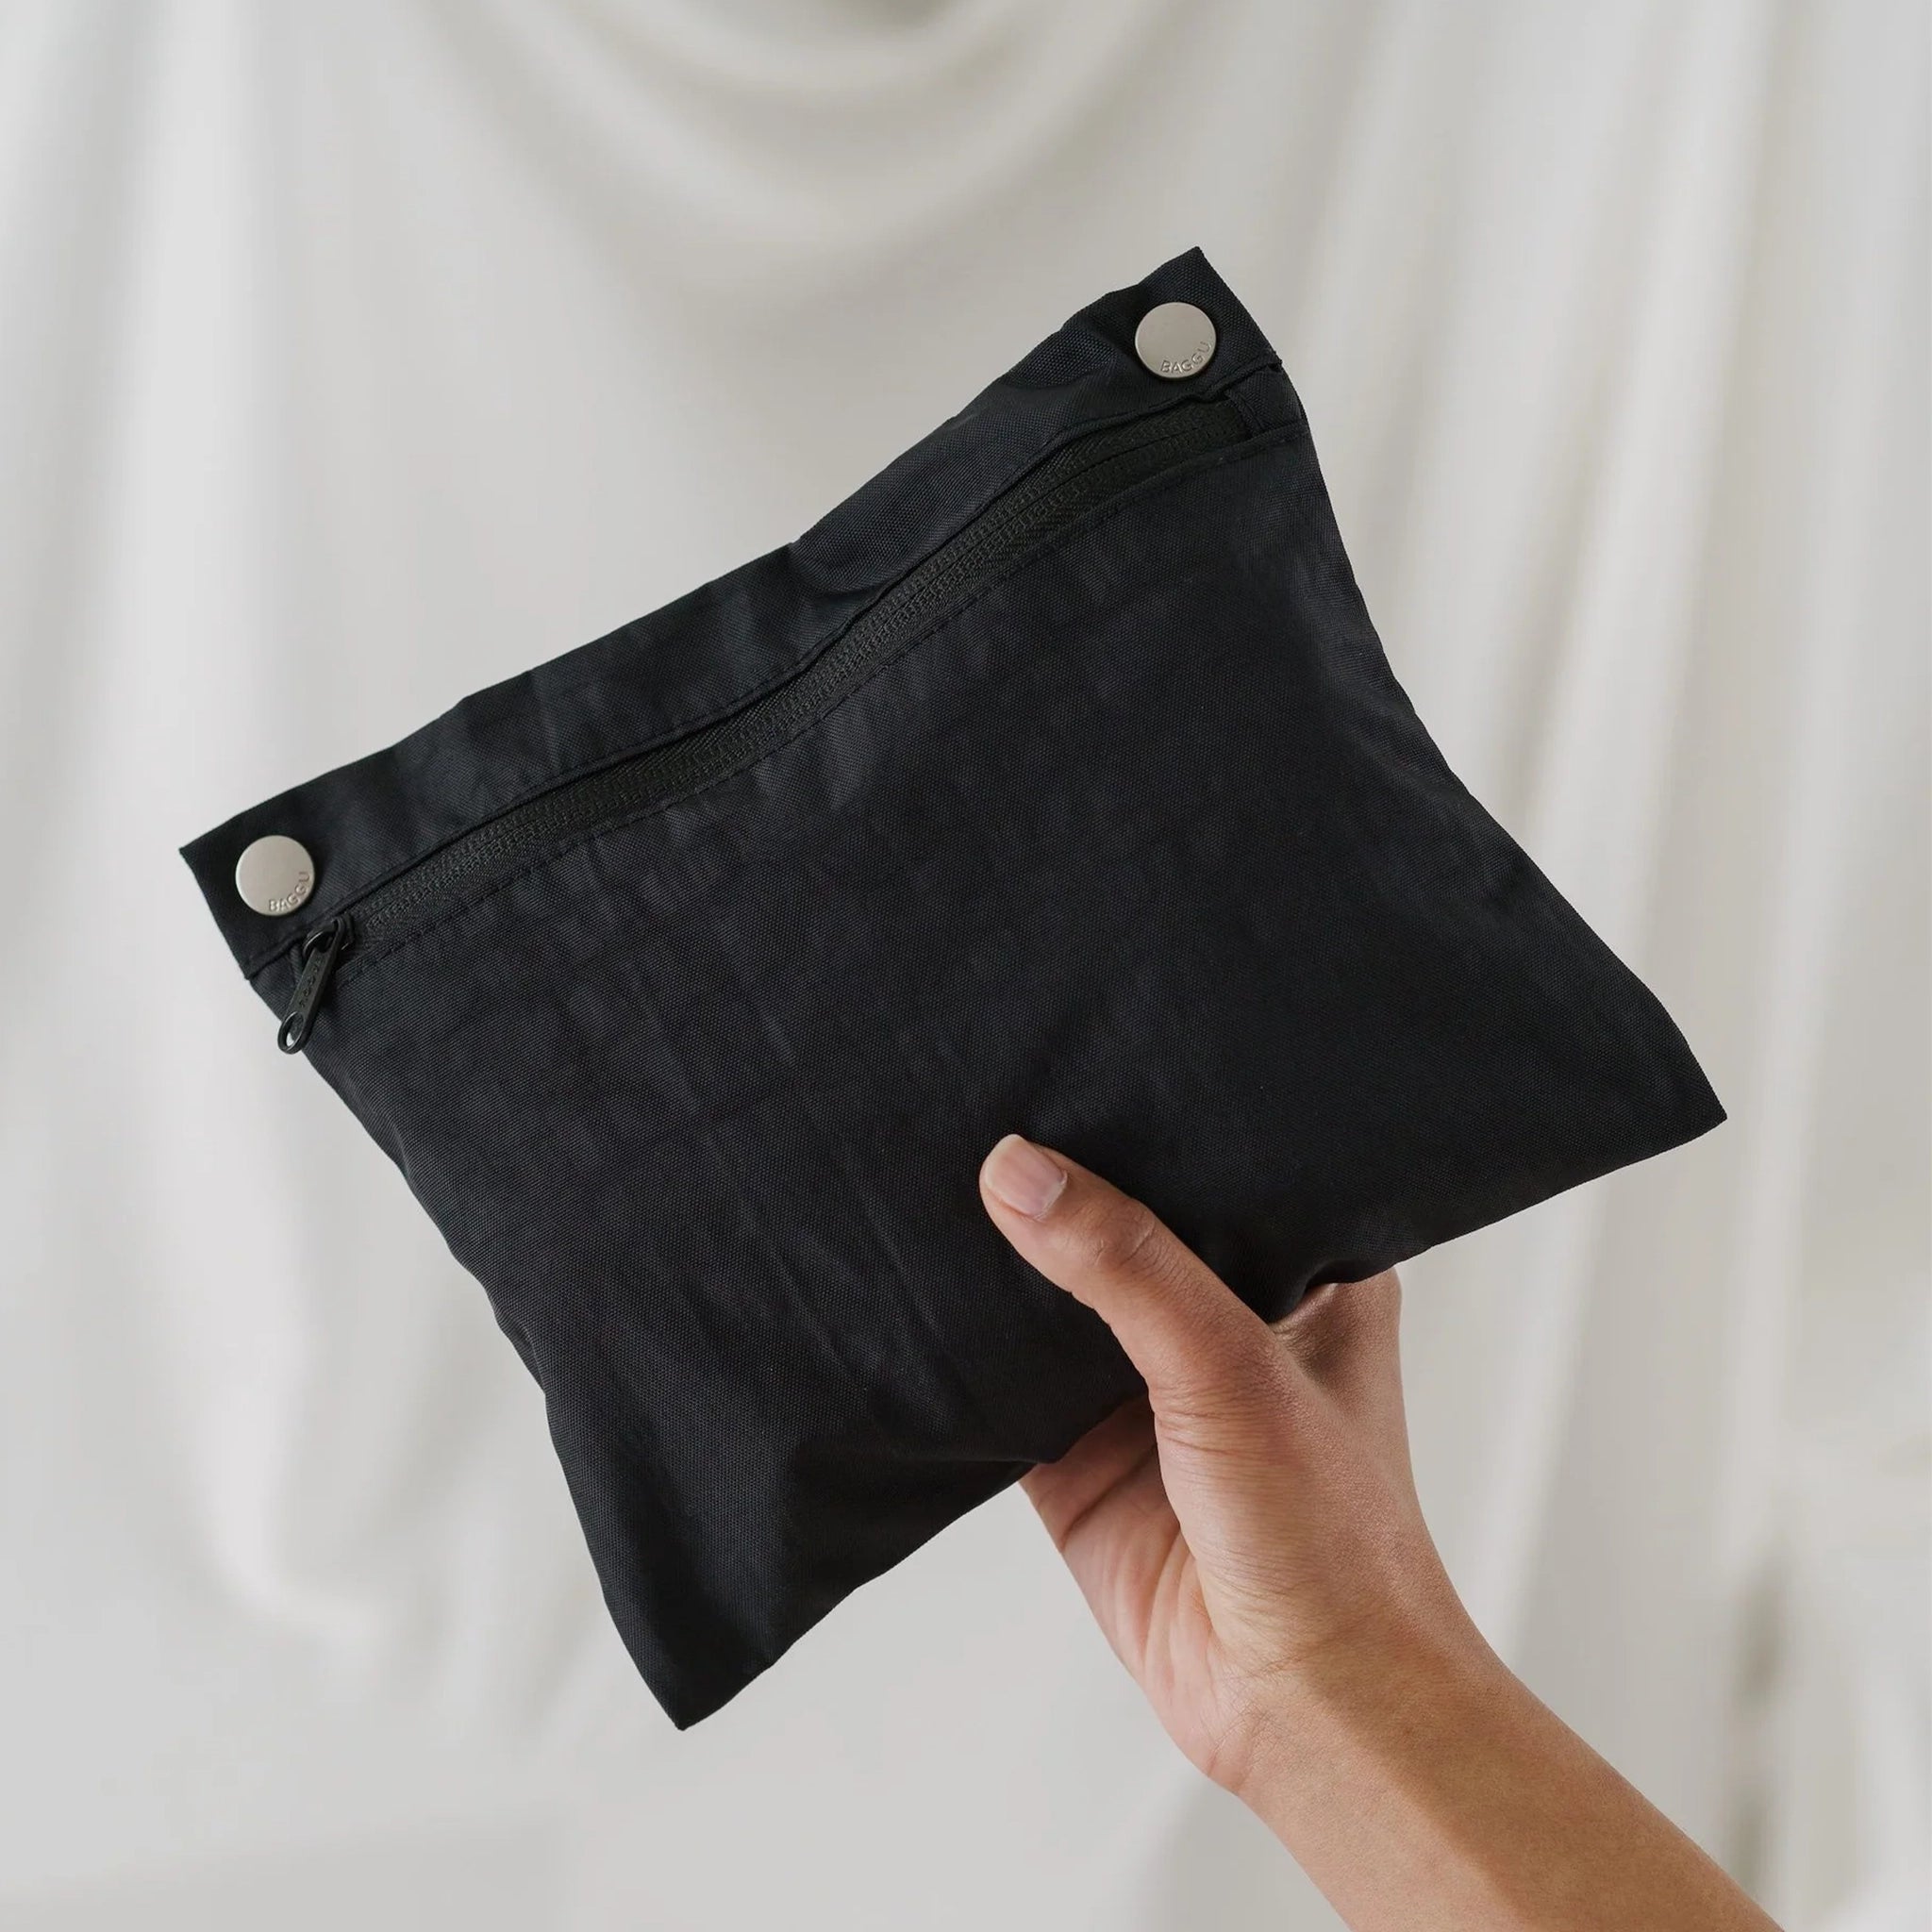 On a white background is a photograph of the black removable pouch that comes on the inside of the bag. 